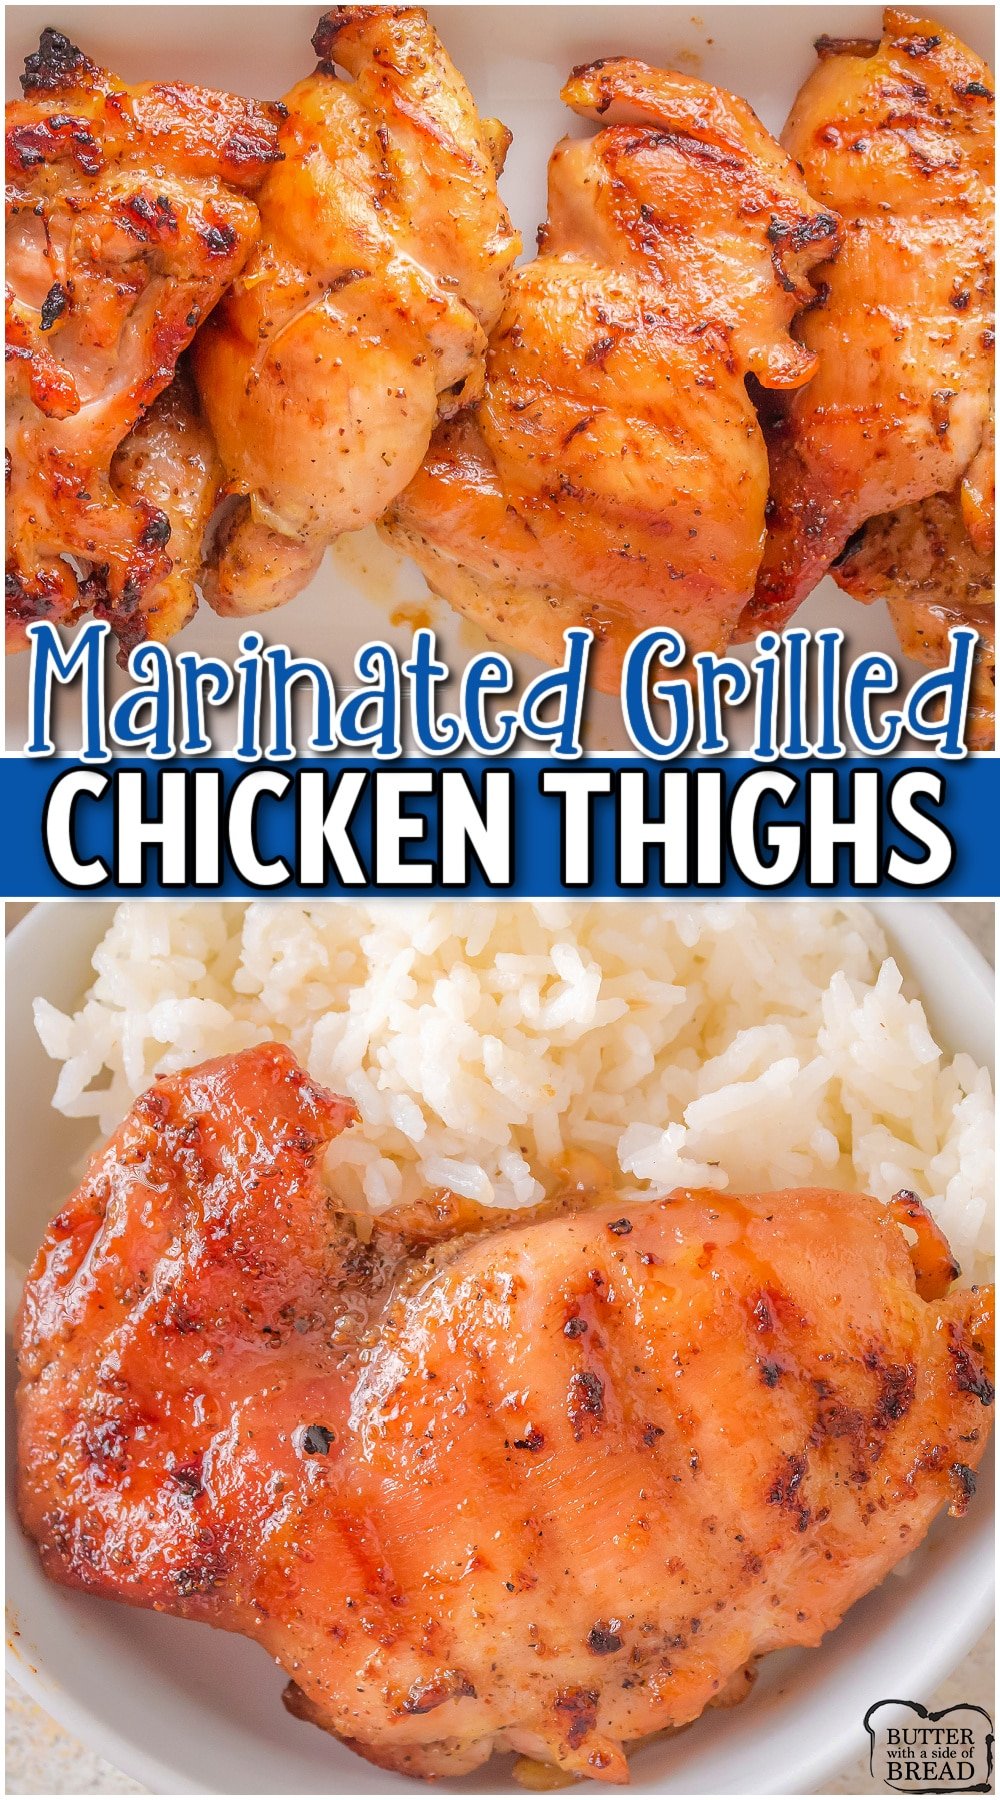 Marinated Grilled Chicken Thighs are perfect for summertime grilling! BBQ boneless chicken thighs  made with simple ingredients like garlic, brown sugar & soy sauce for fantastic juicy flavor!